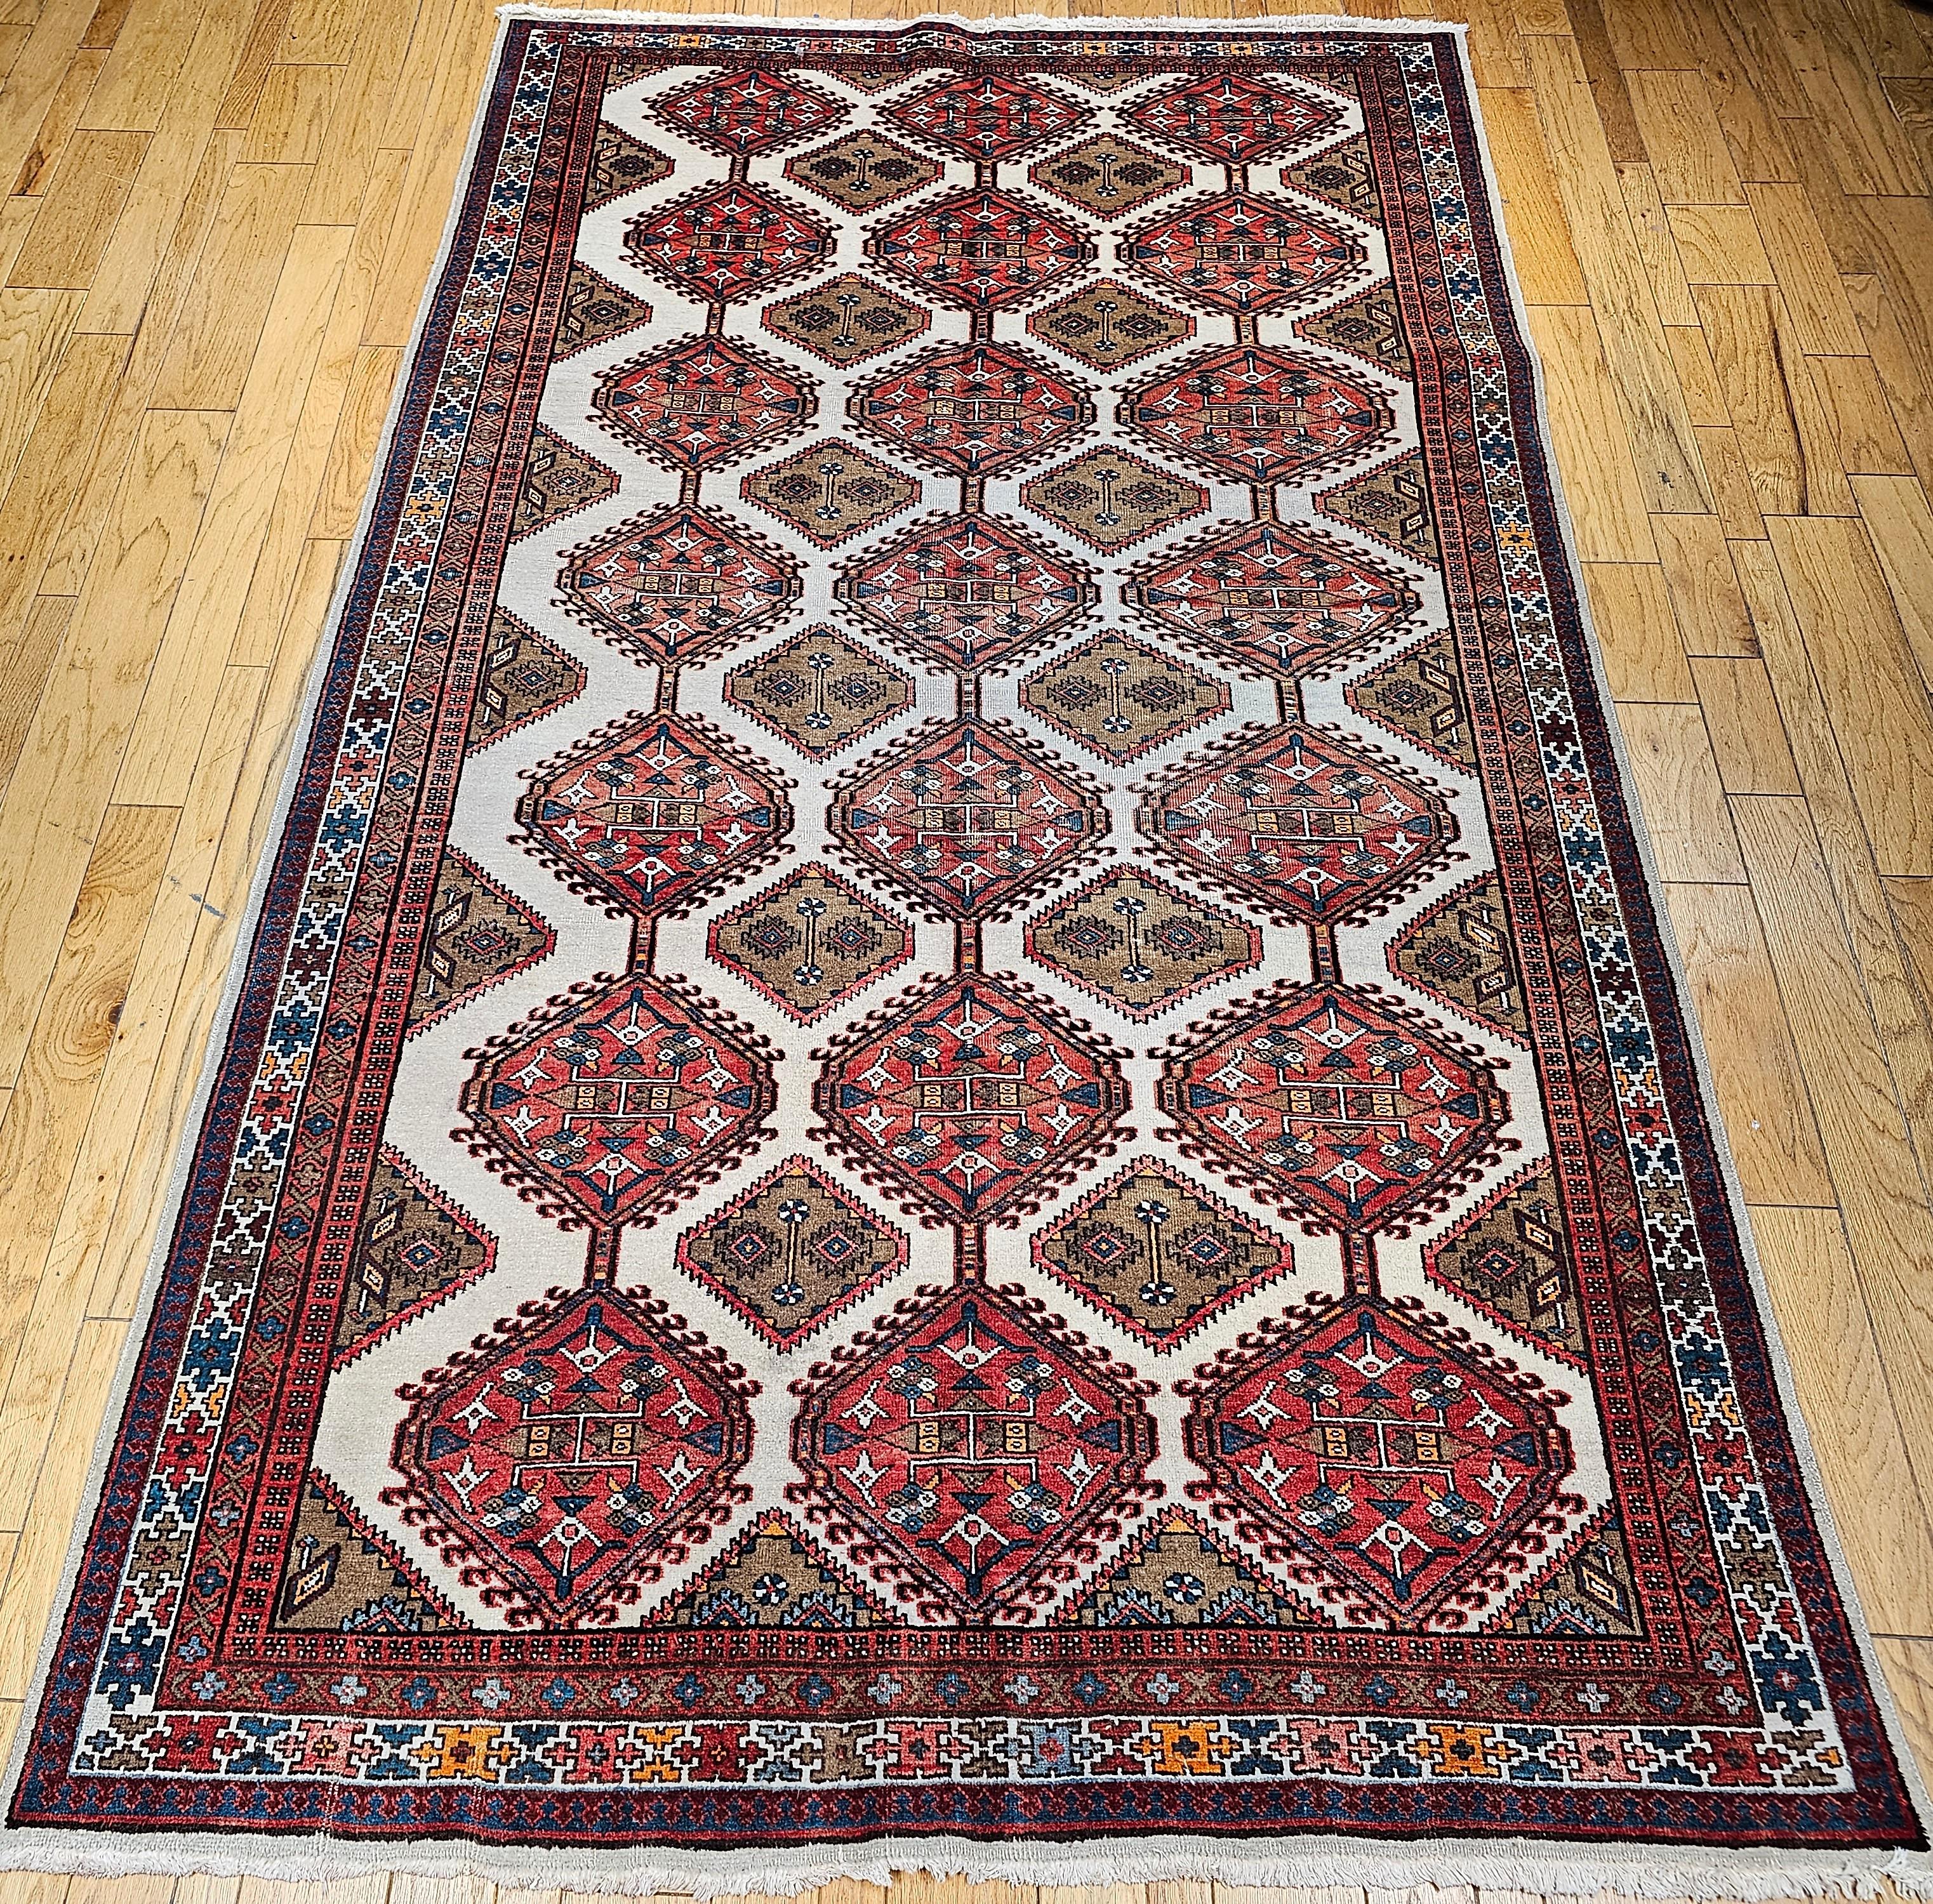 Vintage Persian Malayer in an all over geometric pattern in ivory, camelhair, red, brown, and green.   This beautiful Persian Malayer is a room size or a gallery rug that has an ivory color background with a large geometric pattern. The rug has